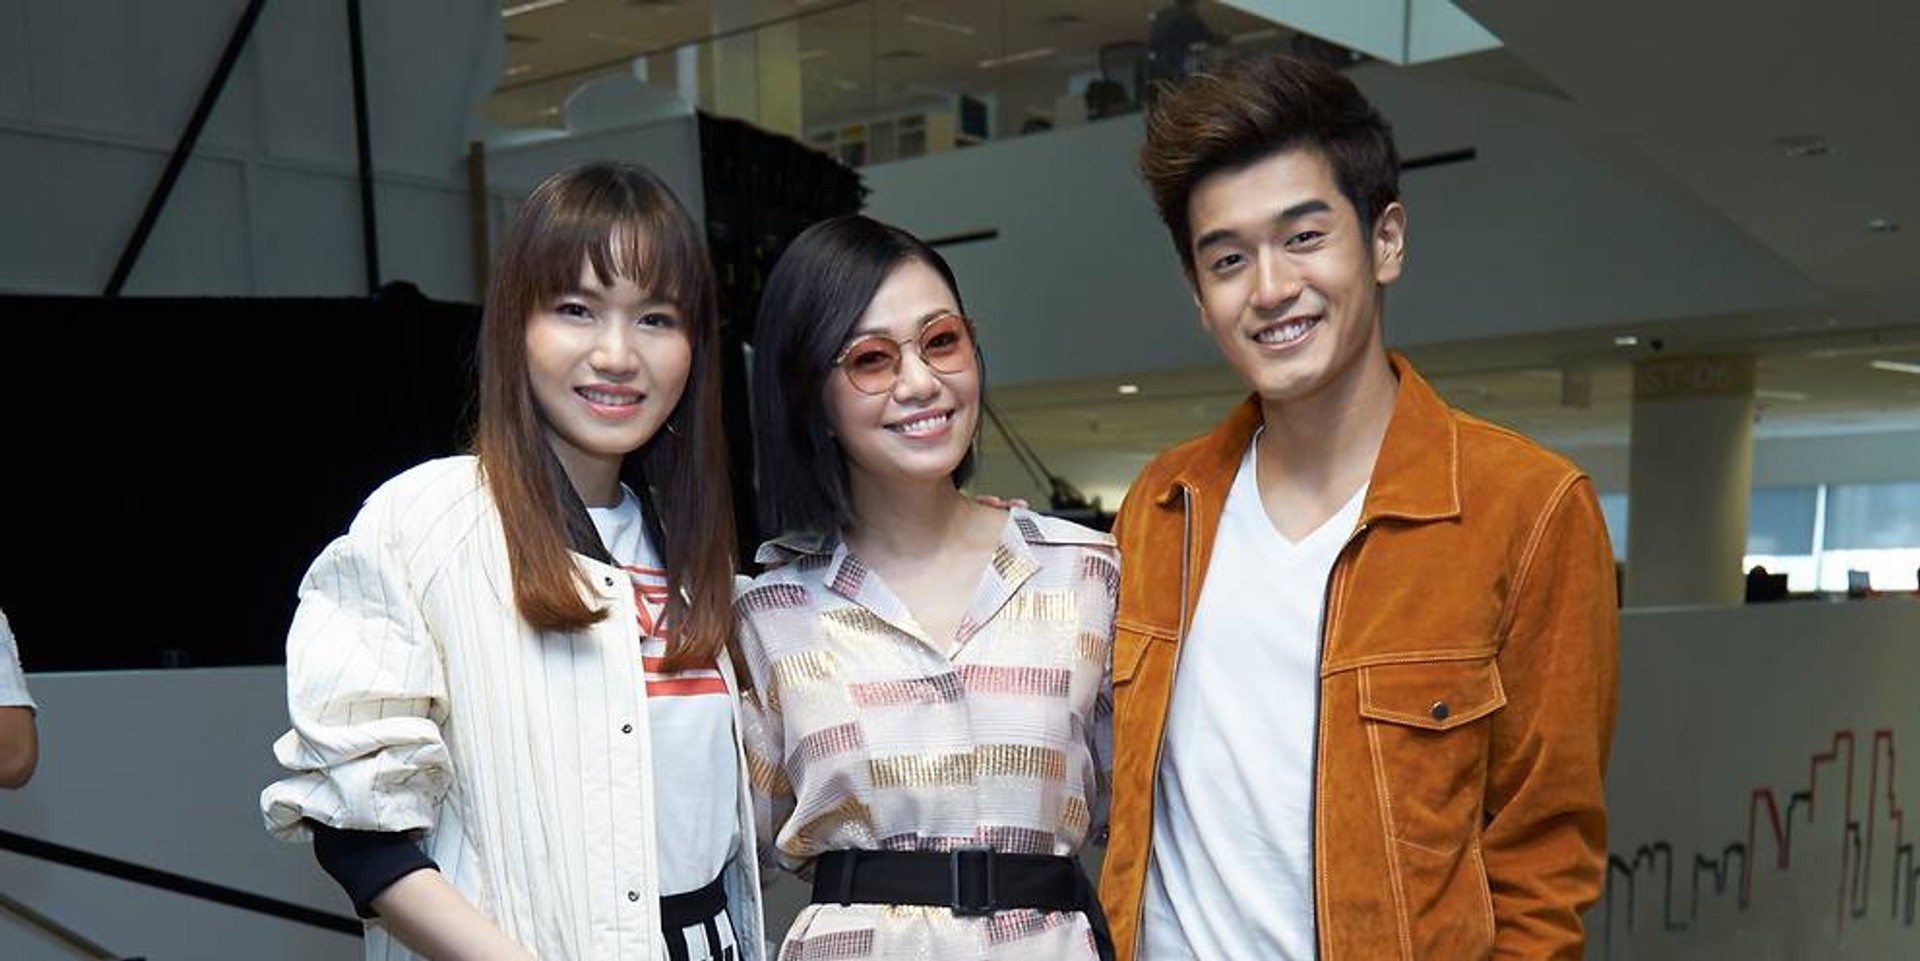 Channel 8 holds new singing competition to find Singapore's next Mandopop star